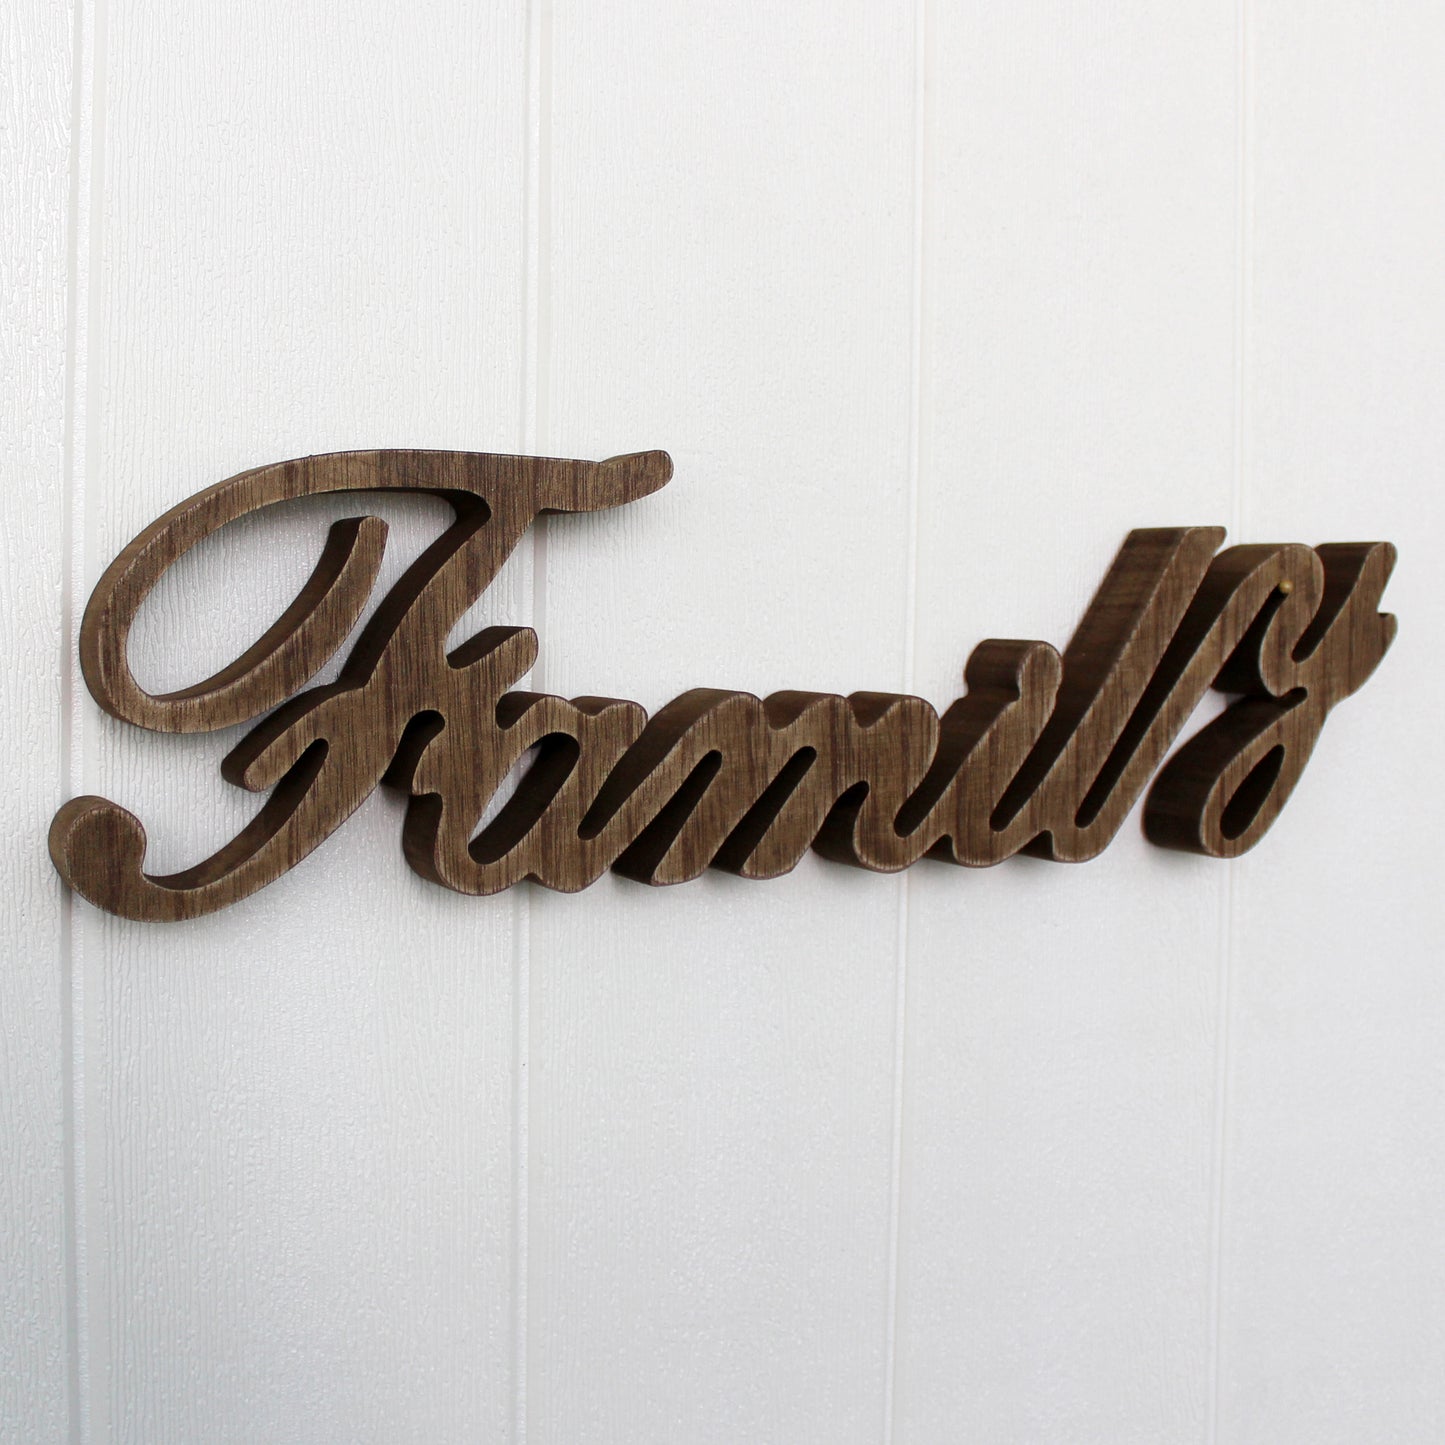 CVHOMEDECO. Rustic Vintage Distressed Wooden Words Sign Free Standing "Family" Tabletop/Shelf/Home Wall/Office Decoration Art, 15.75 x 4.5 x 1 Inch